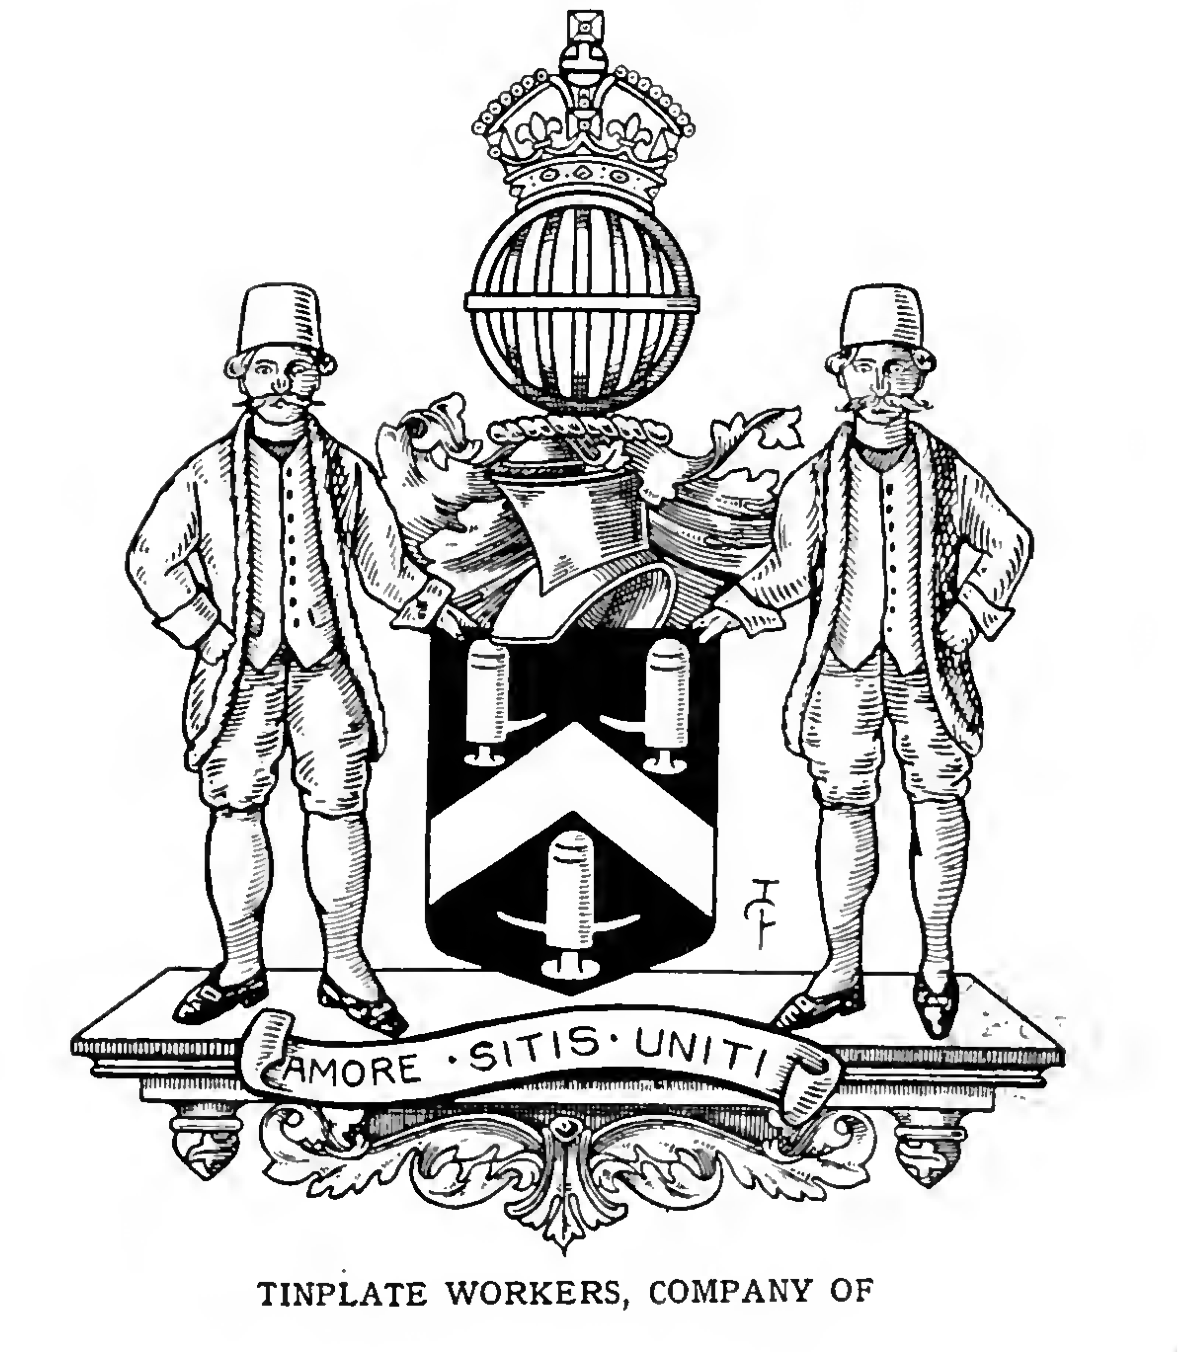 TINPLATE WORKERS, alias 'WIRE WORKERS, The Worshipful Company